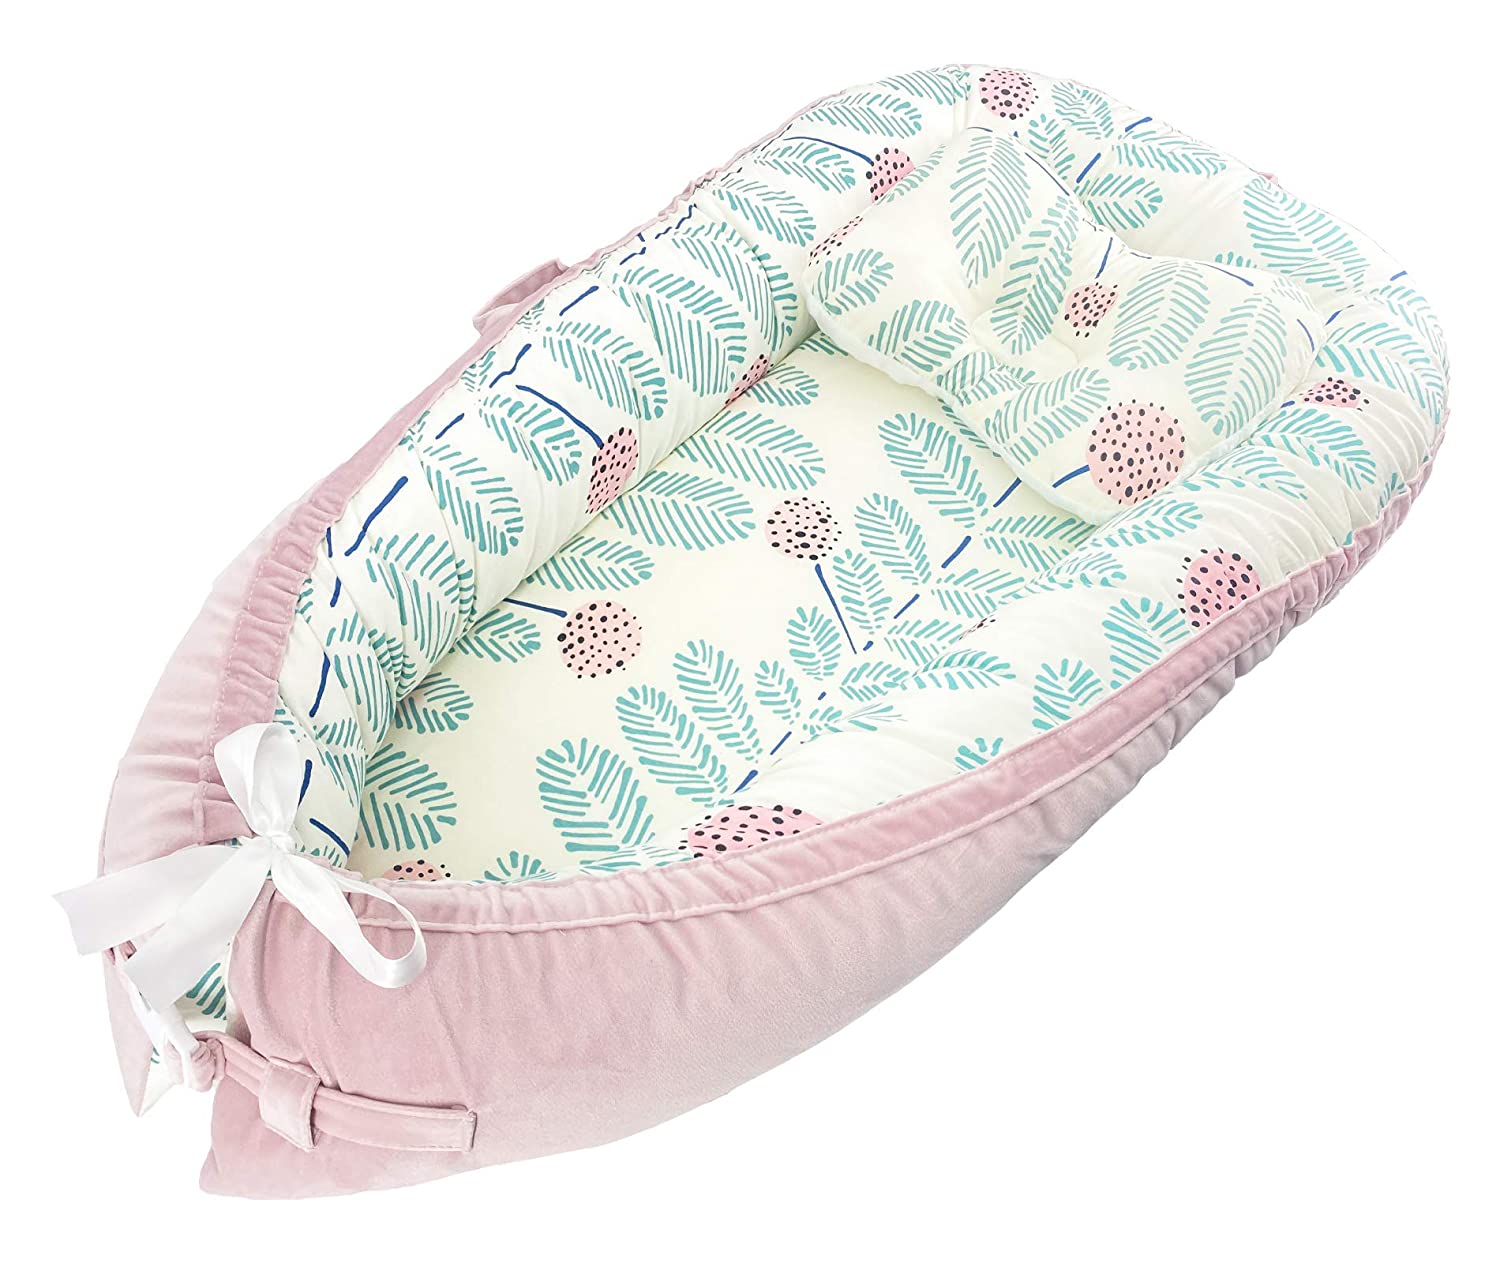 Animals -Portable Infant Lounger Bassinet Perfect for Co-Sleeping -Super Soft & Breathable Newborn Crib with 100% Cotton Hypoallergenic Cover-Suitable from 0-12 Months Adebo Premium Baby Nest 